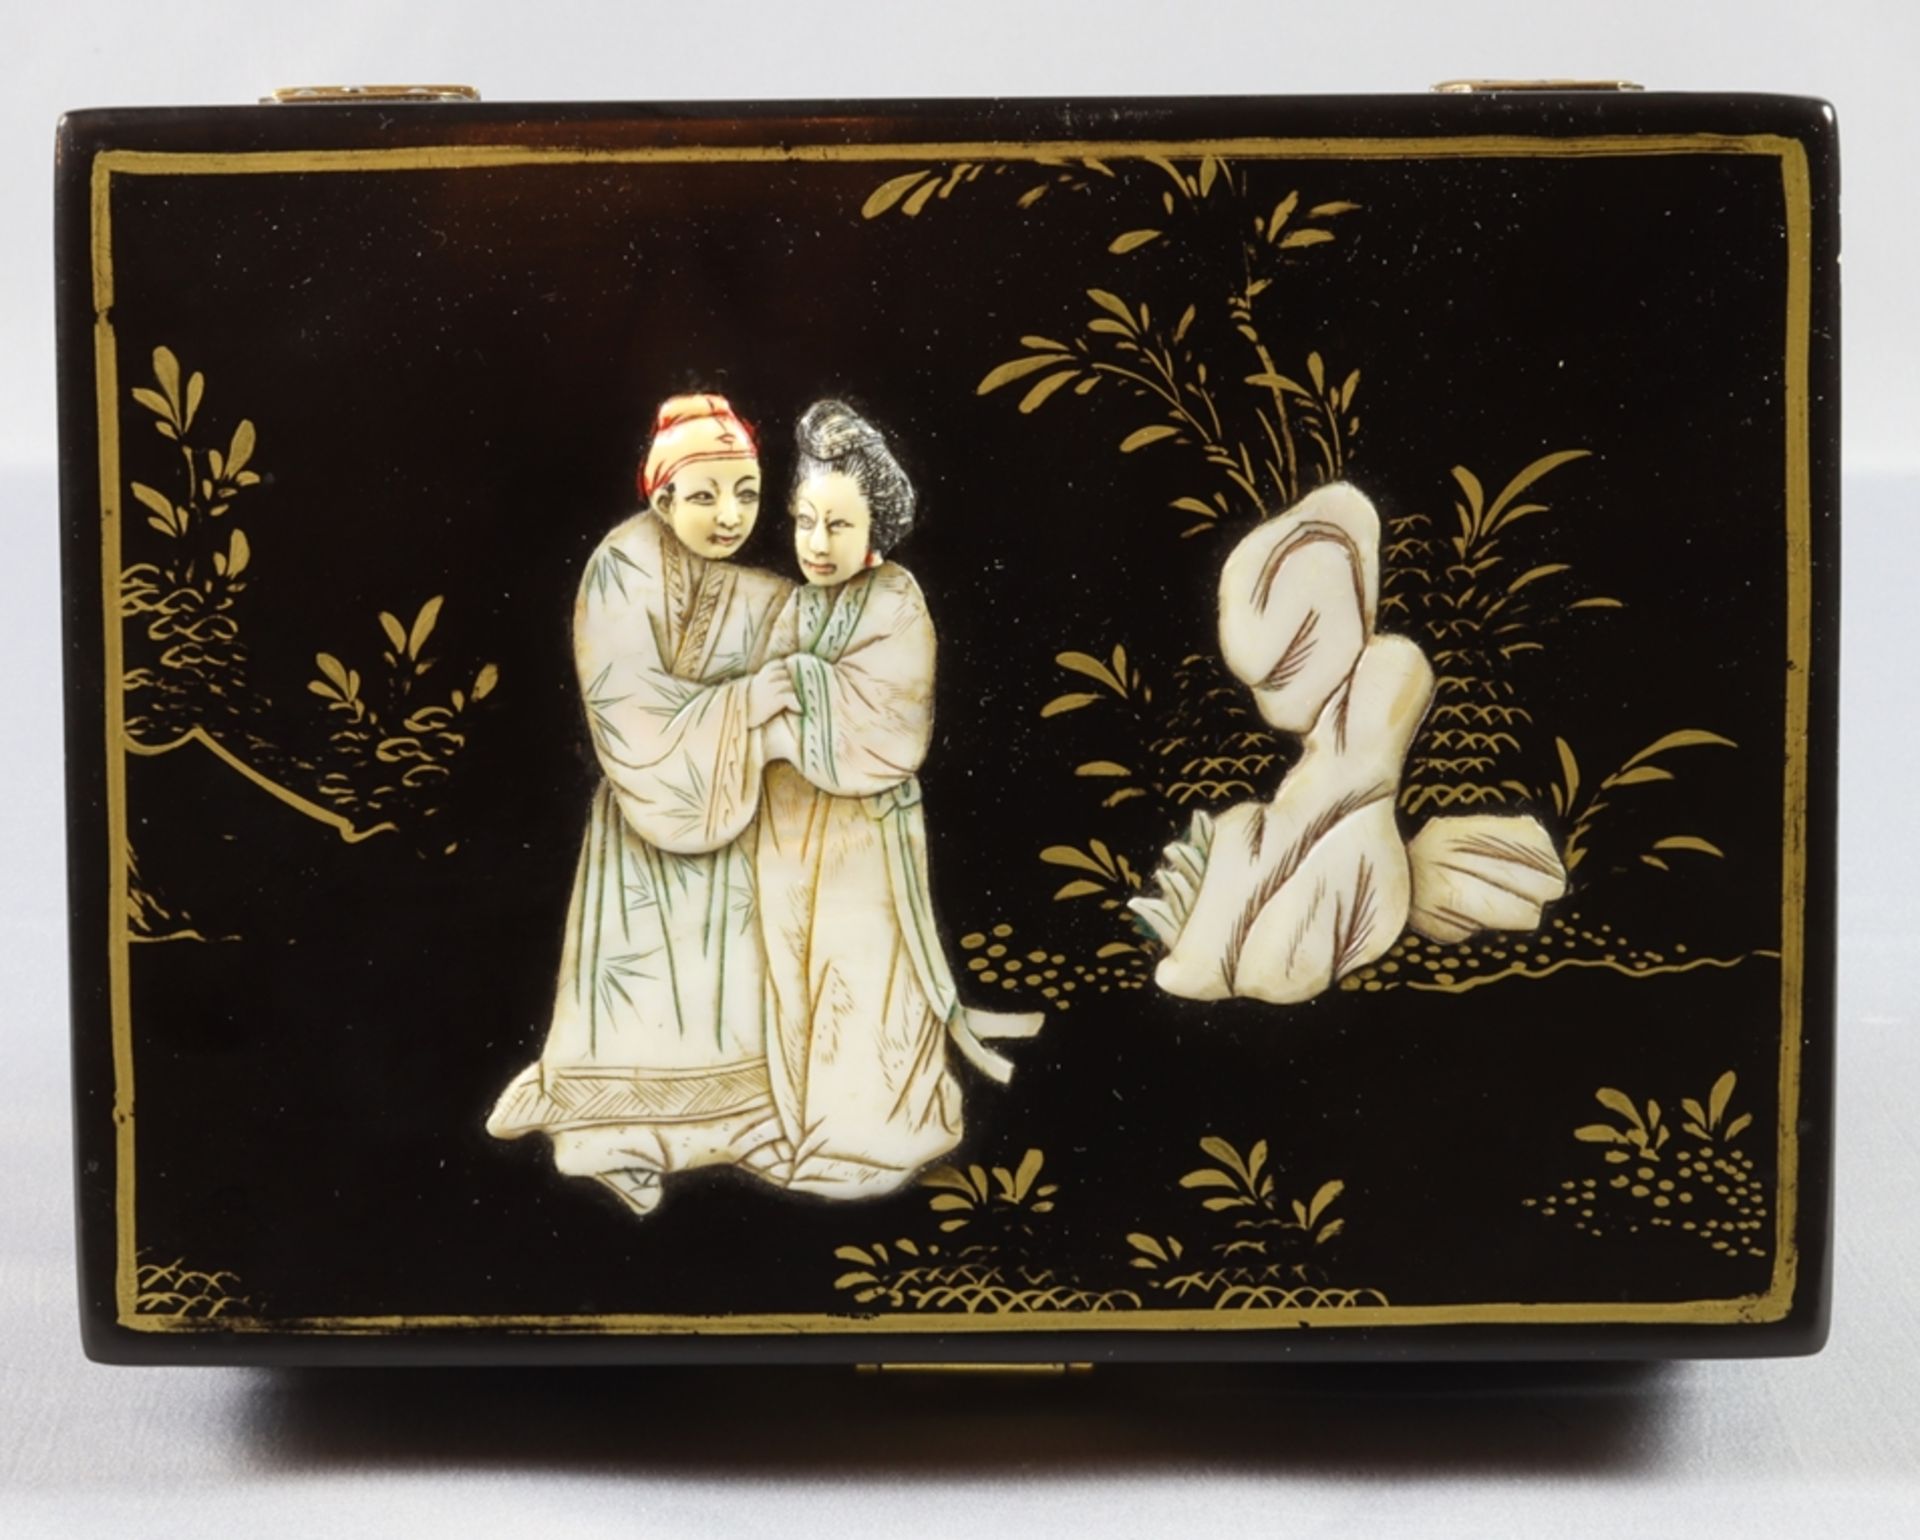 Lot of three Asian jewellery boxes, 19th/20th c., China, Japan - Image 2 of 2